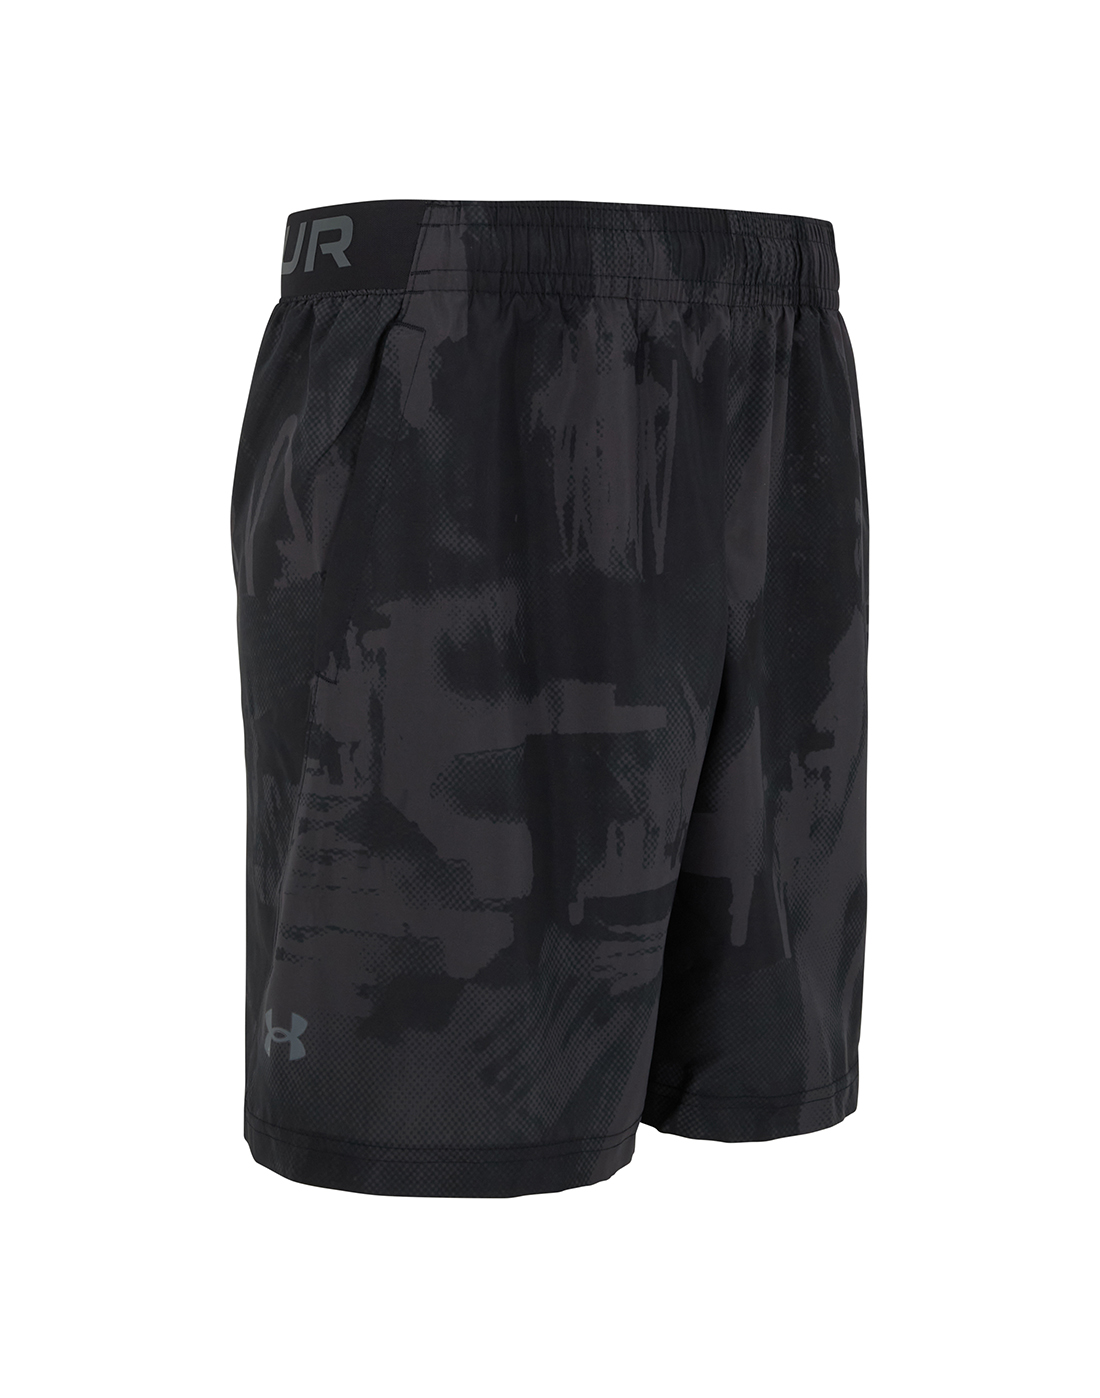 Under Armour Mens Woven Adapt Training Shorts - Black | Life Style ...